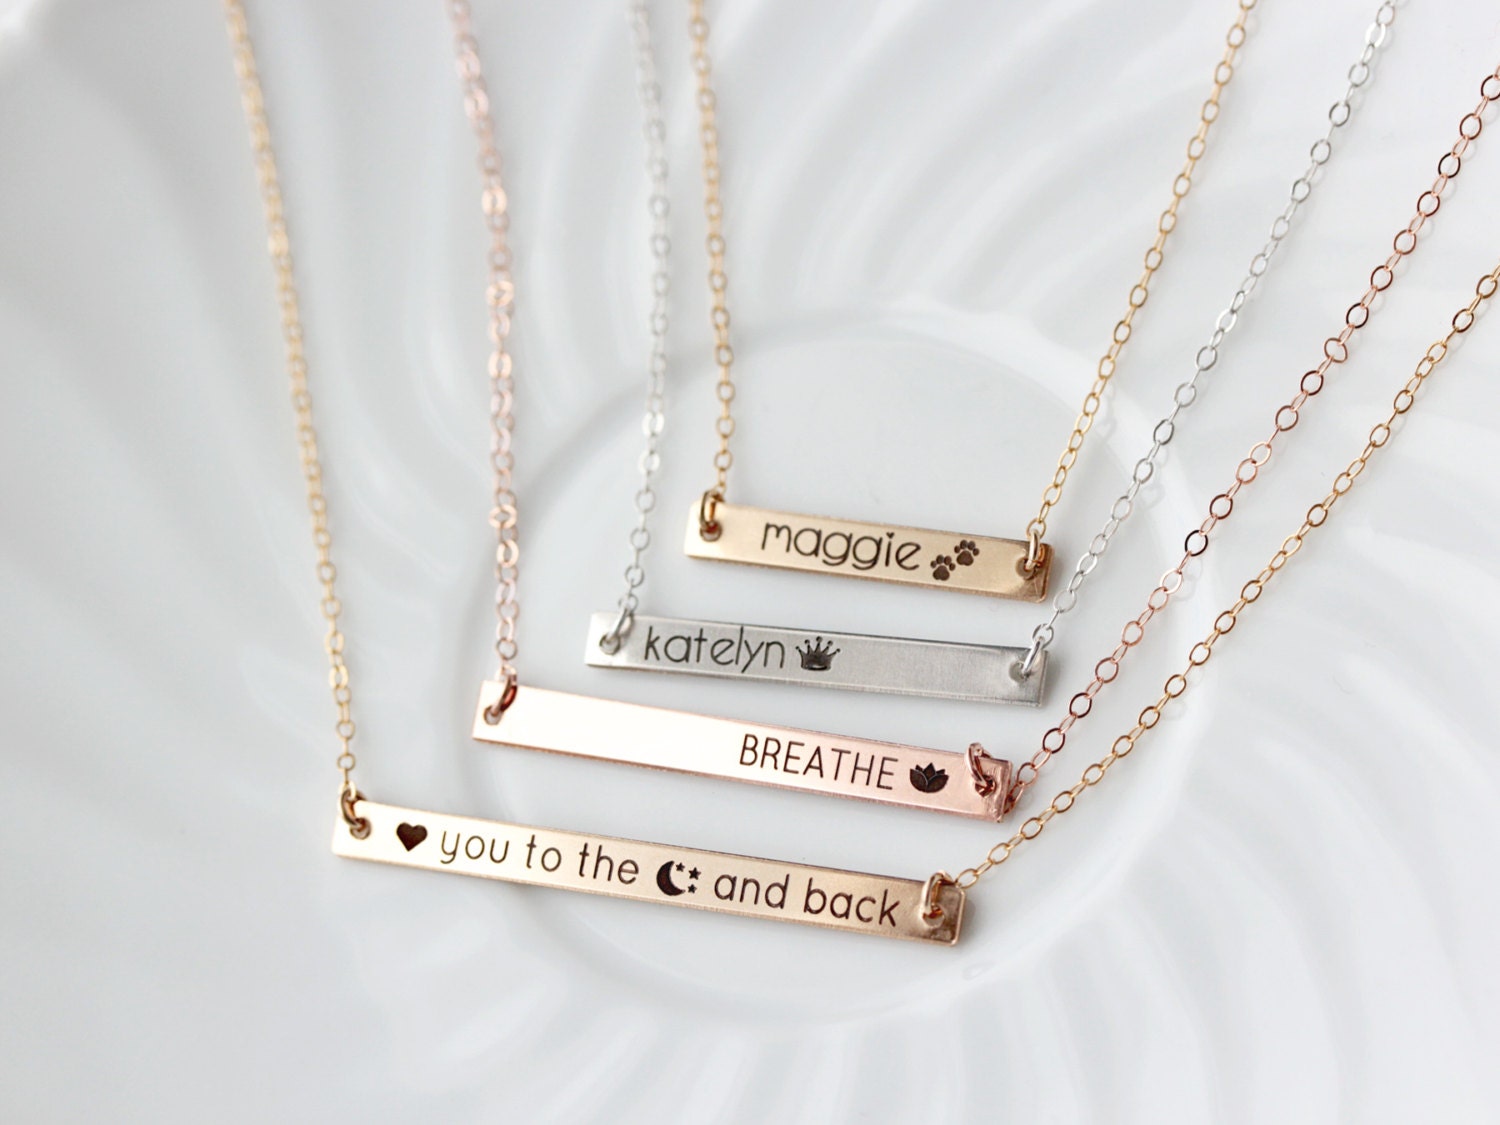 excellent.c Customized Couple Necklace Personalized Engraved Bar Necklace with Name & Date